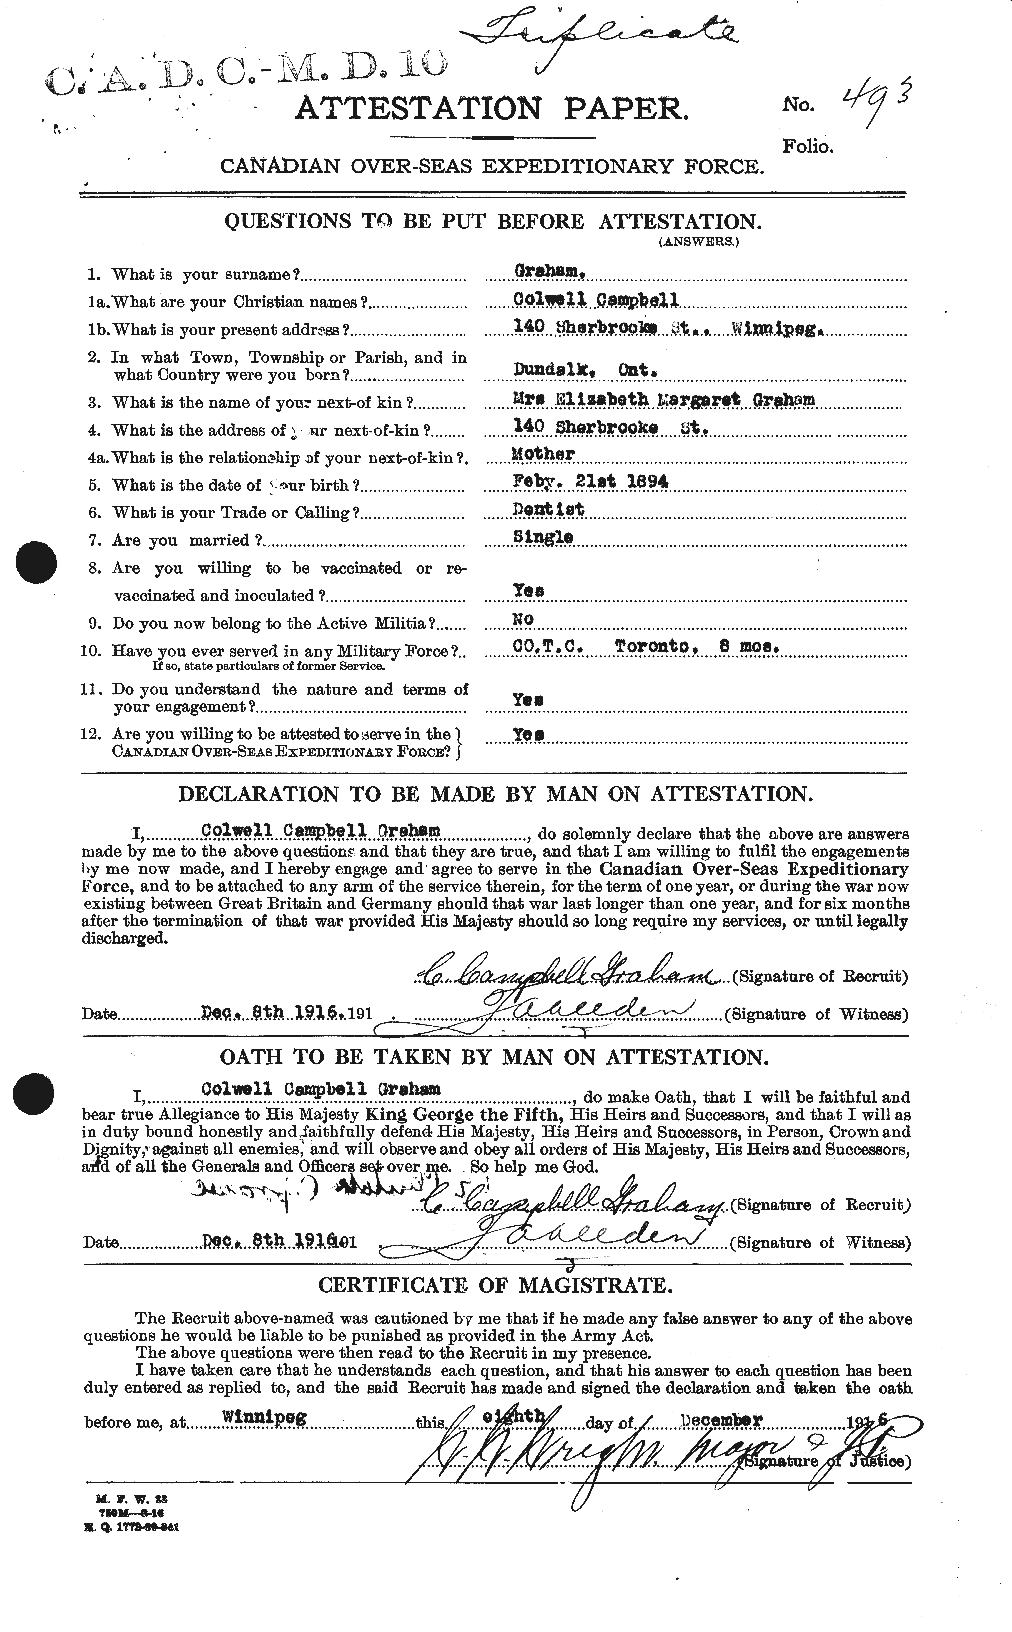 Personnel Records of the First World War - CEF 353802a